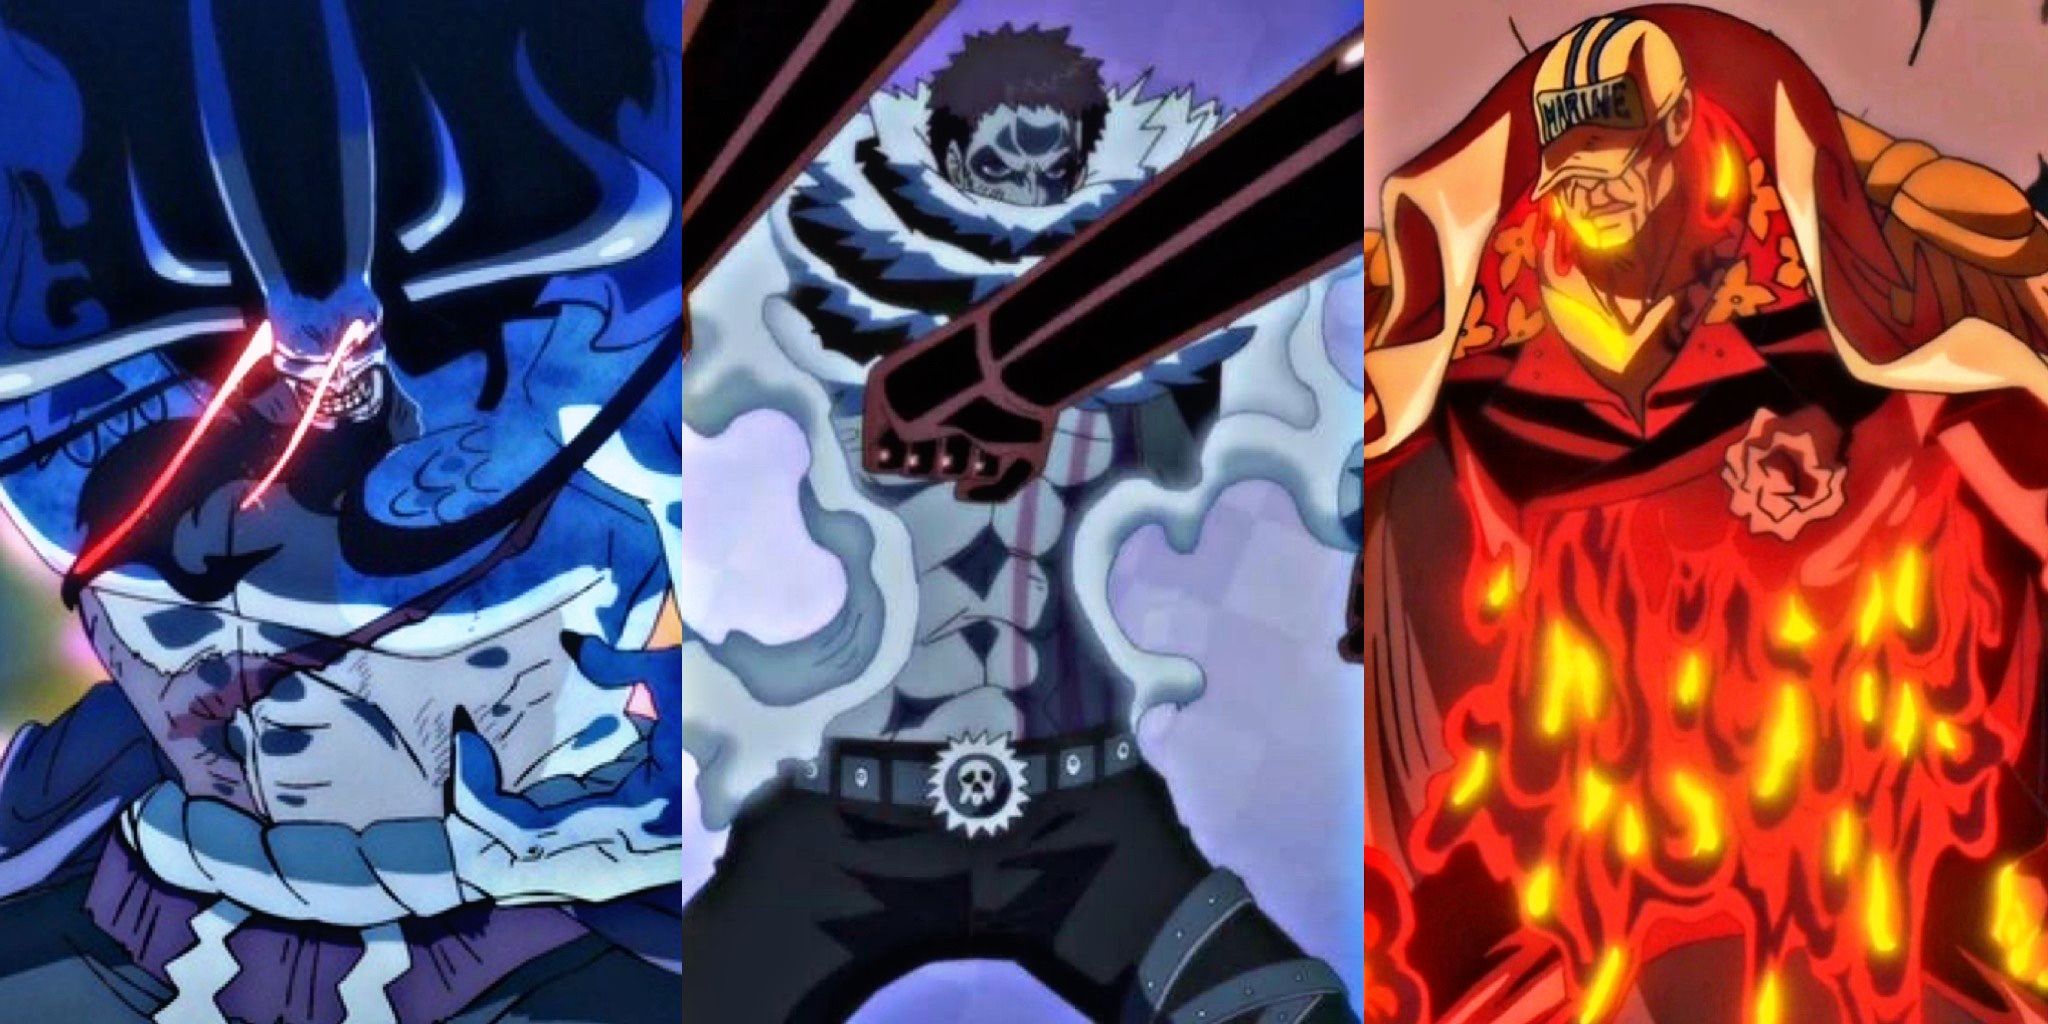 Which is the best devil fruit for each class (logia, zoan, and